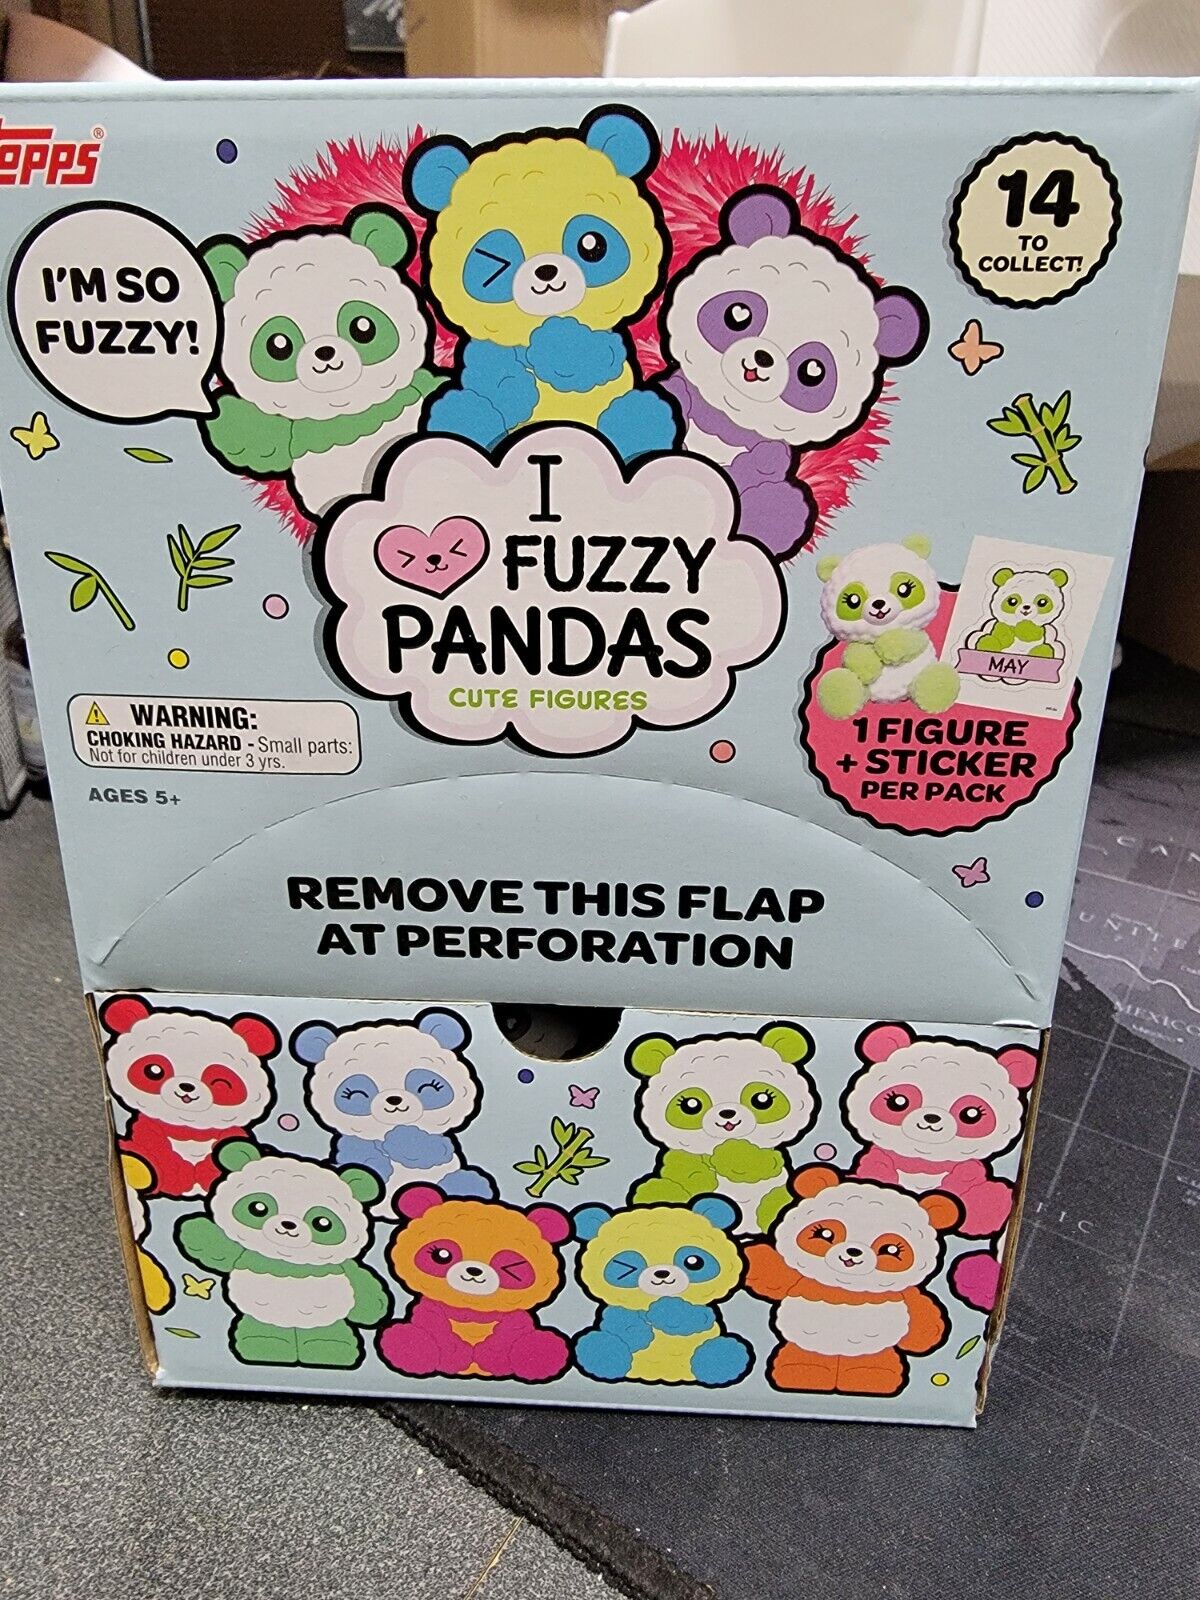 2021 Topps I Love Fuzzy Pandas 12 Pack Box 1 Figure and 1 Sticker Per Pack 